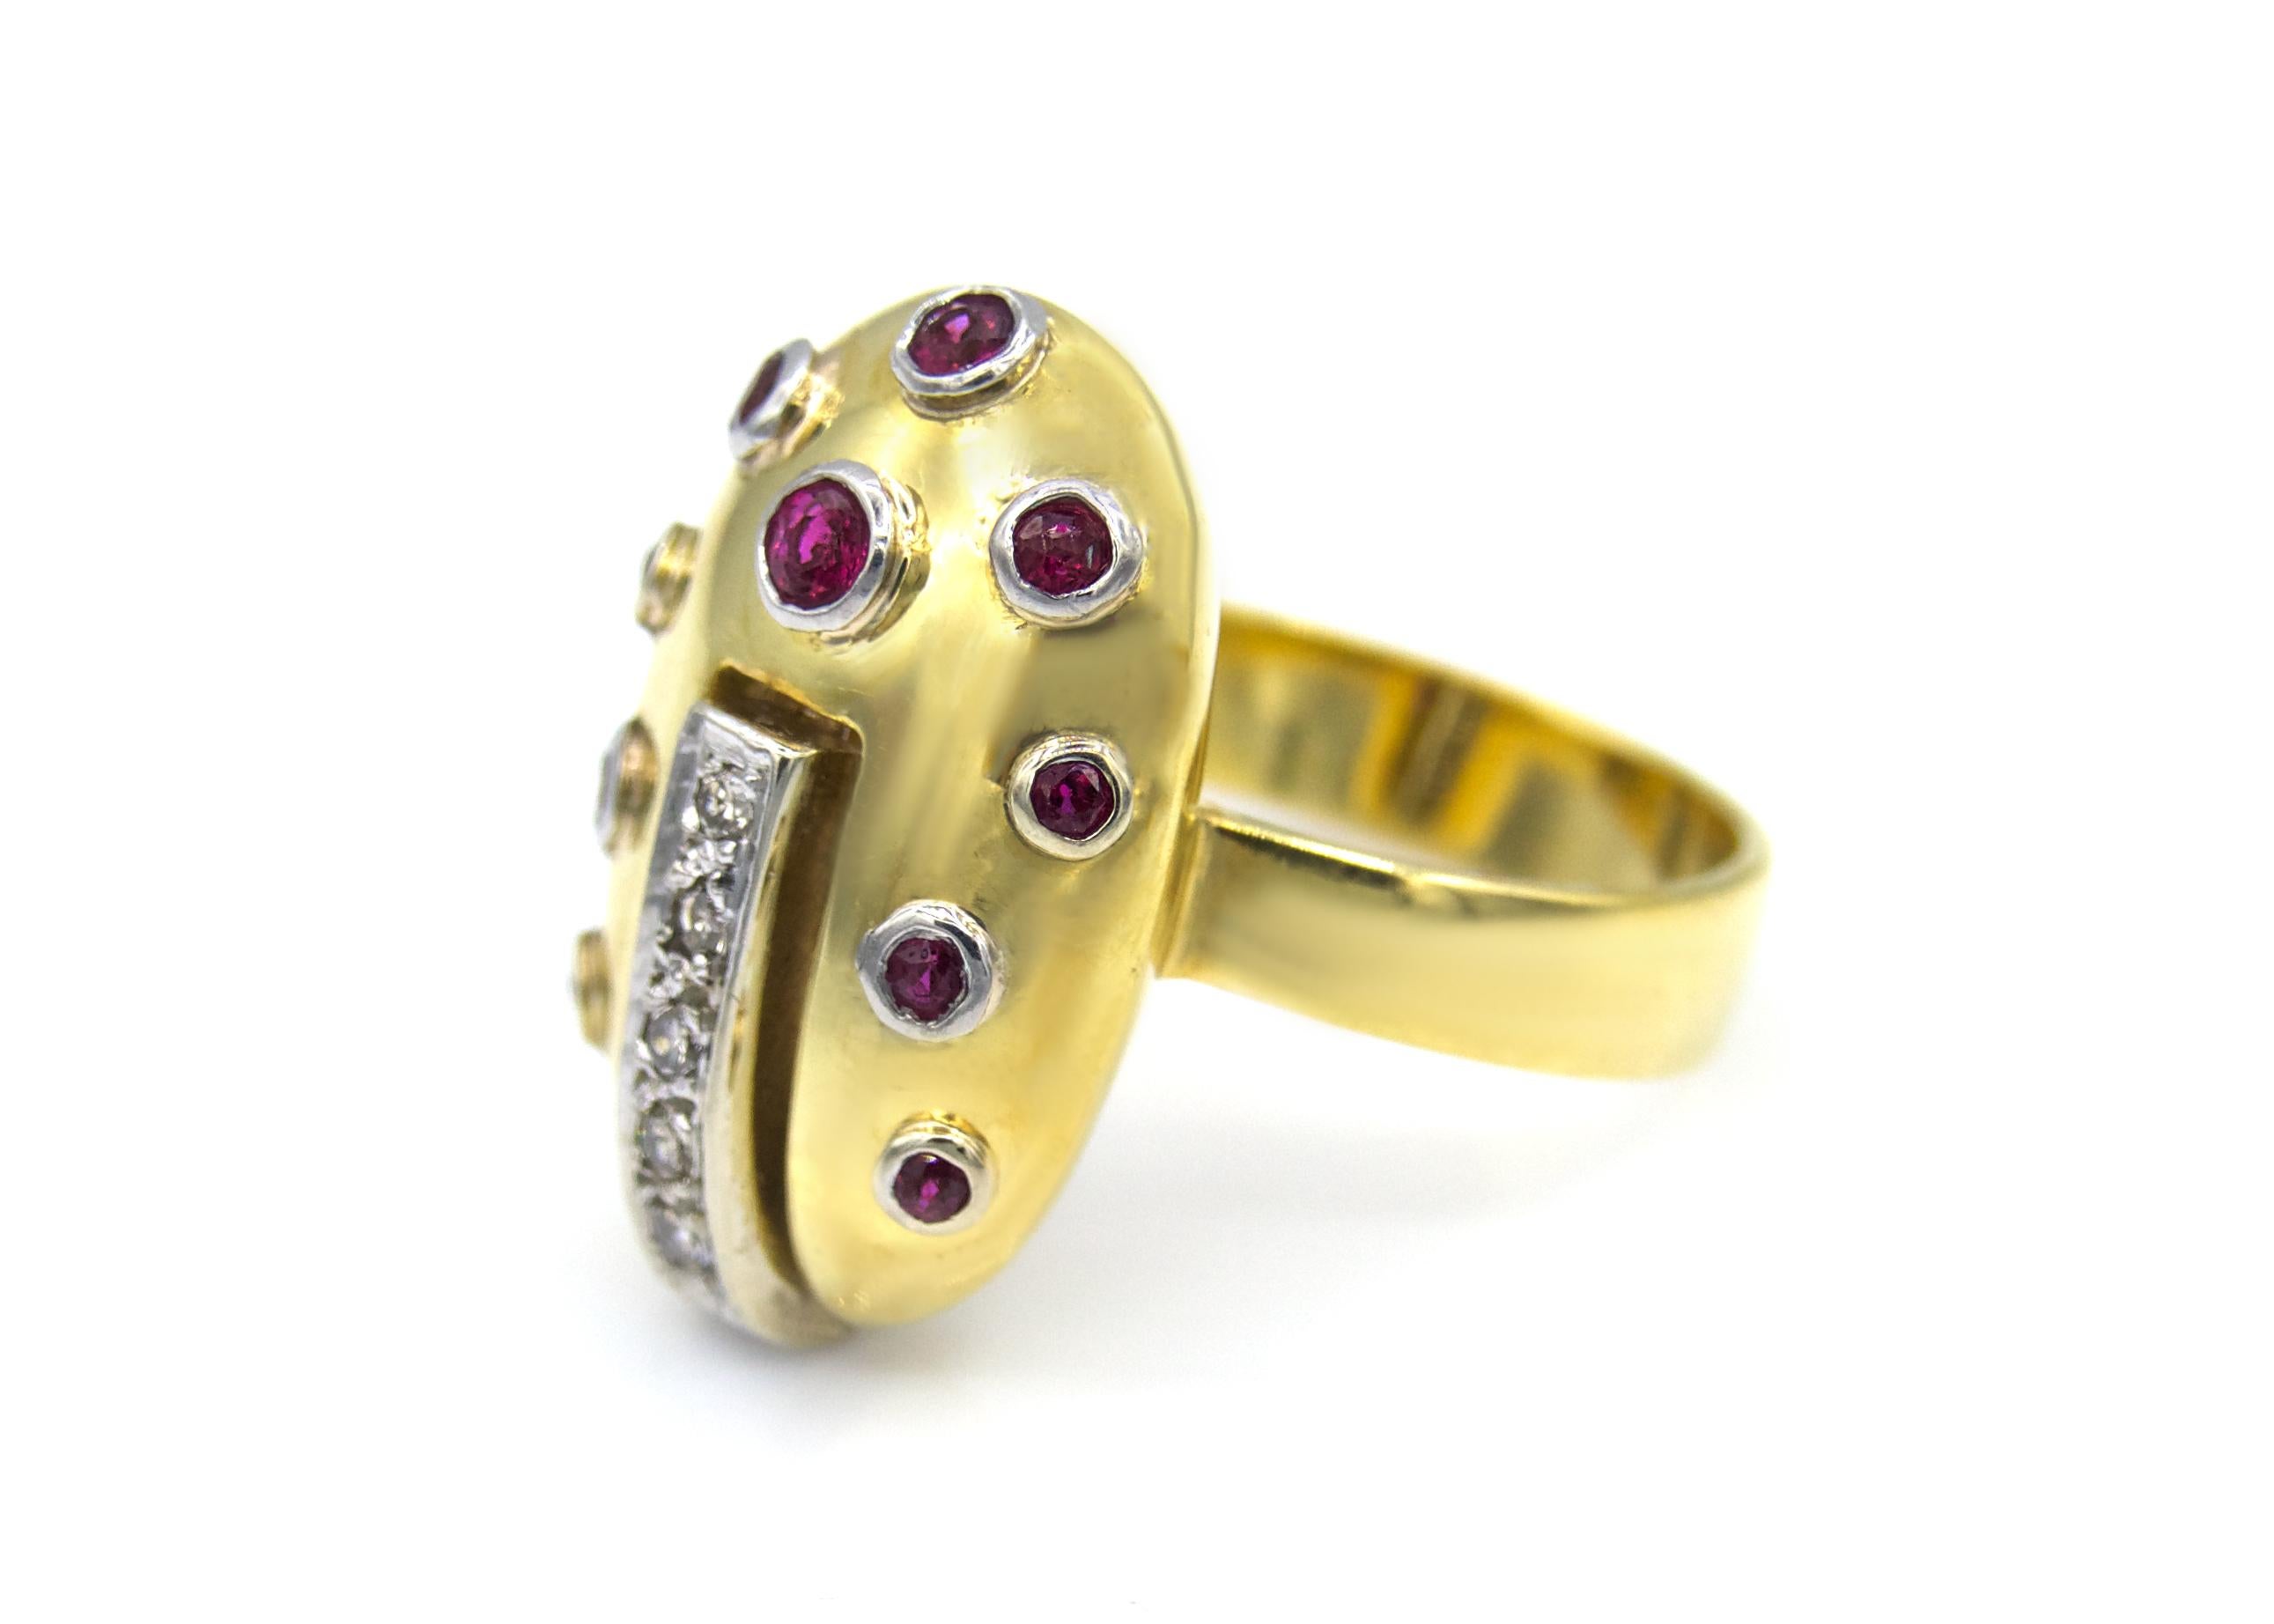 This 18 karat yellow gold domed cocktail ring is an original Ben Moses design, upcycled in the 1990's with the 10 cabochon rubies set in a white gold bezel and diamond strip added.

Size 6.5

7.6 g 

 

